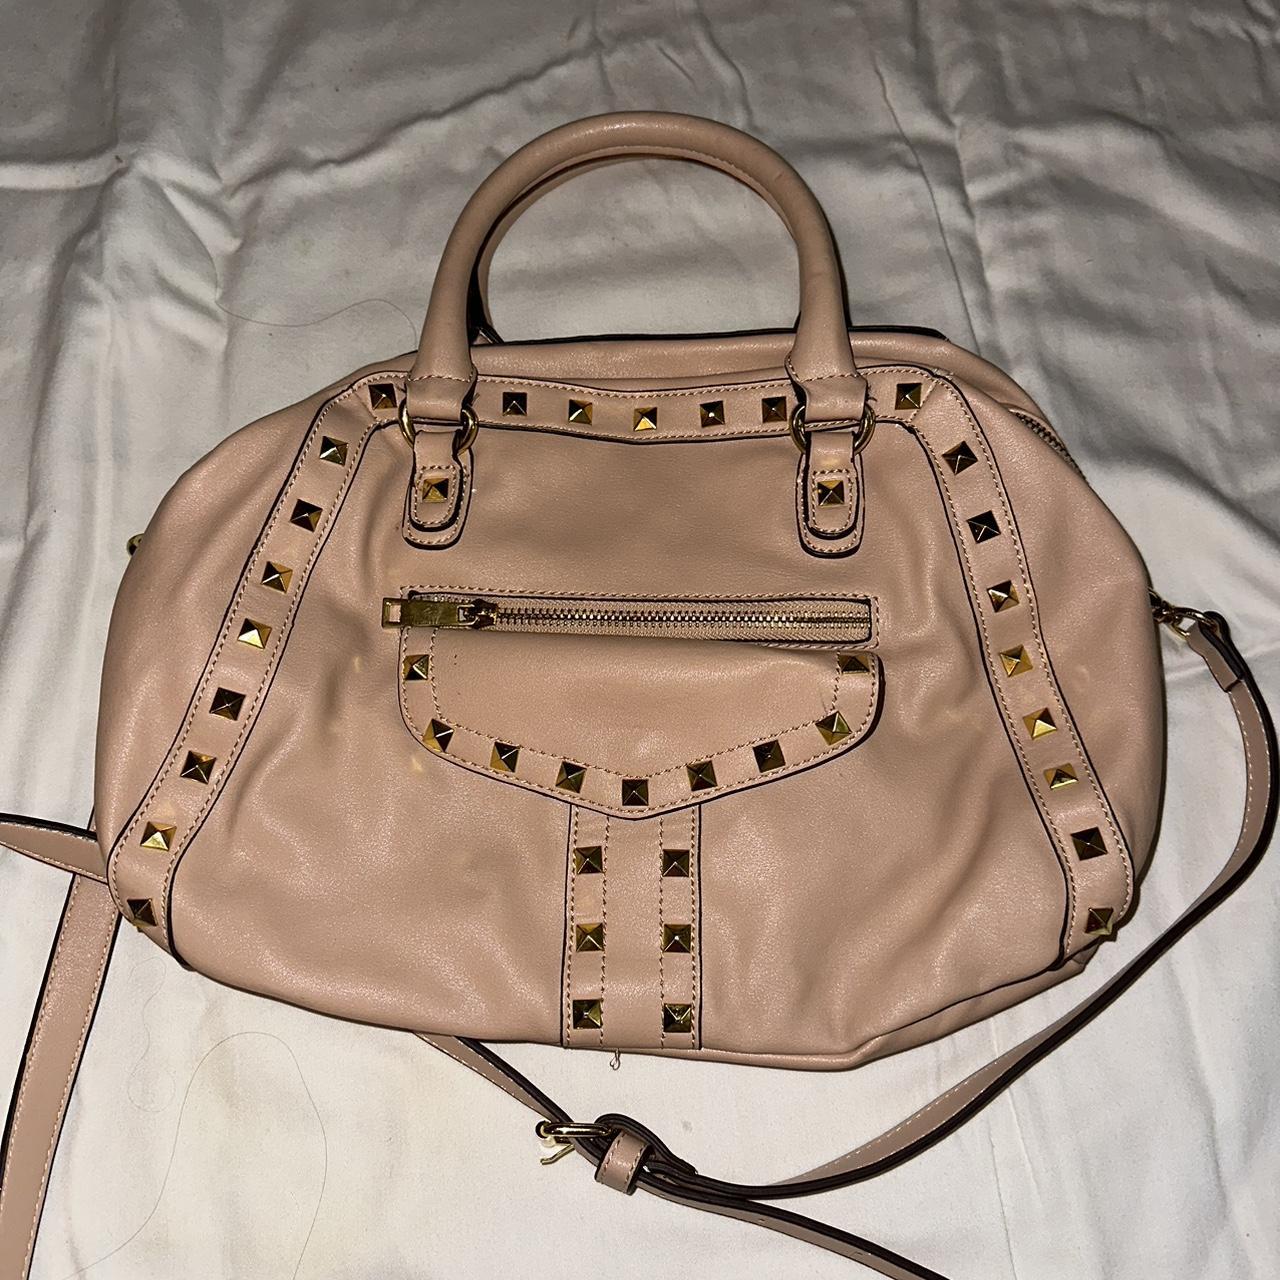 Jessica Simpson Women's Tan and Gold Bag